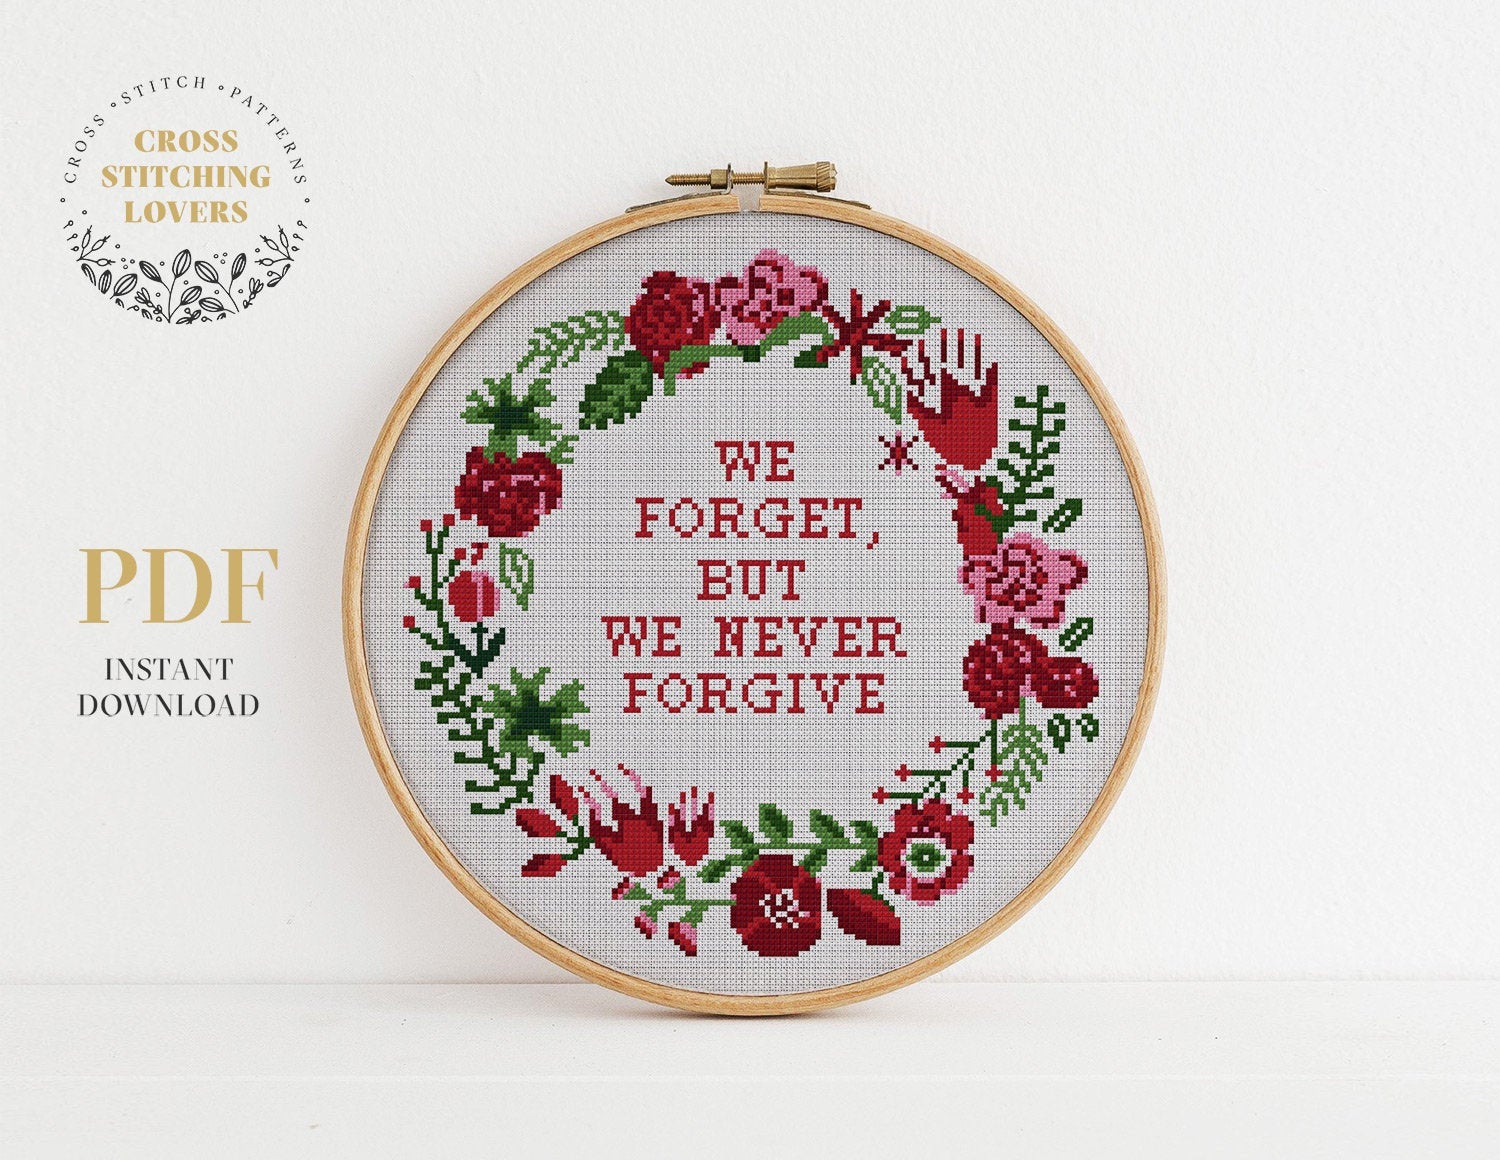 We forger but we never forgive - Cross stitch pattern